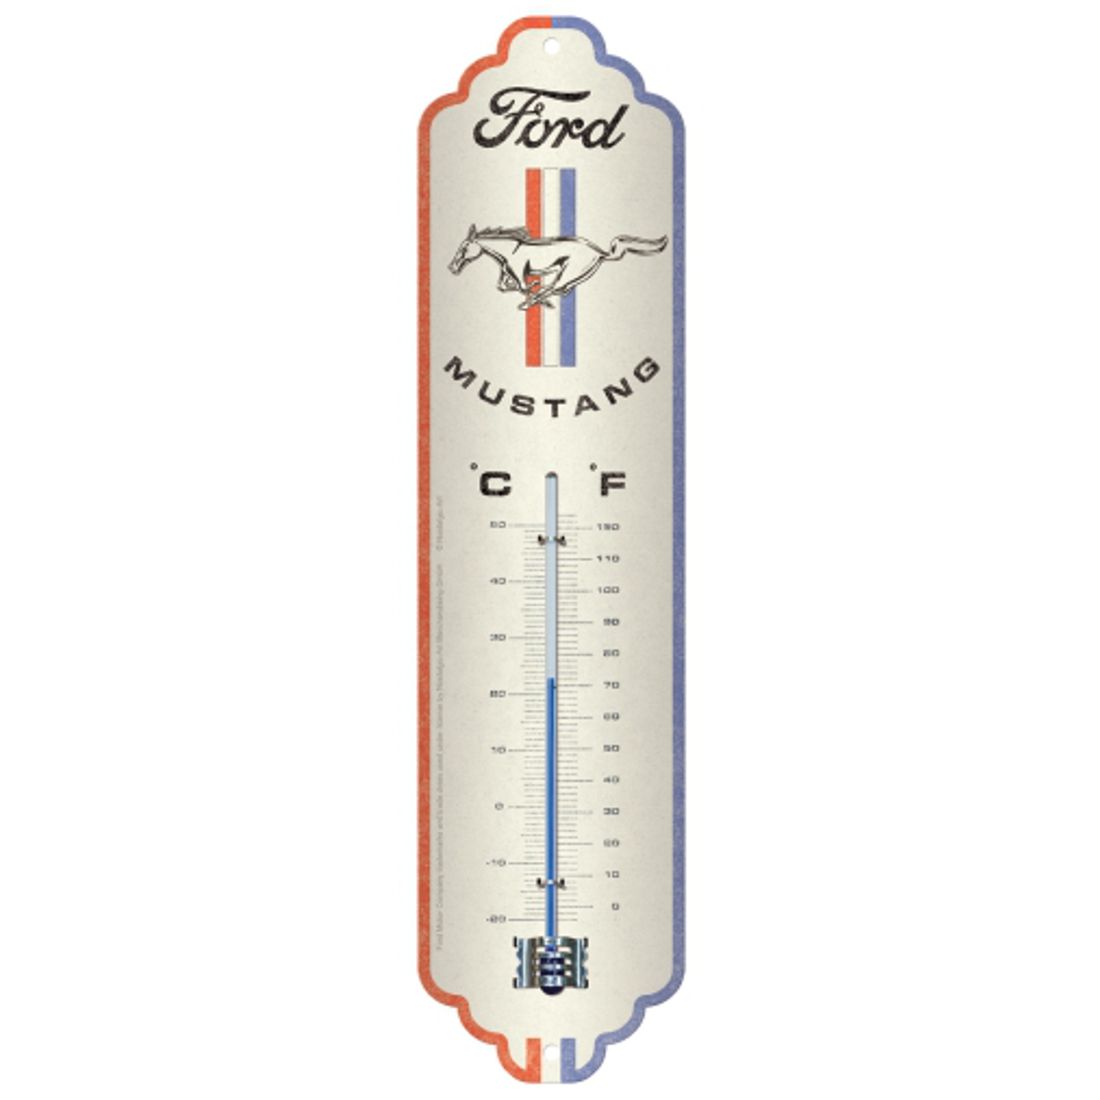 Thermometer - Ford Mustang - Horse & Stripes Logo